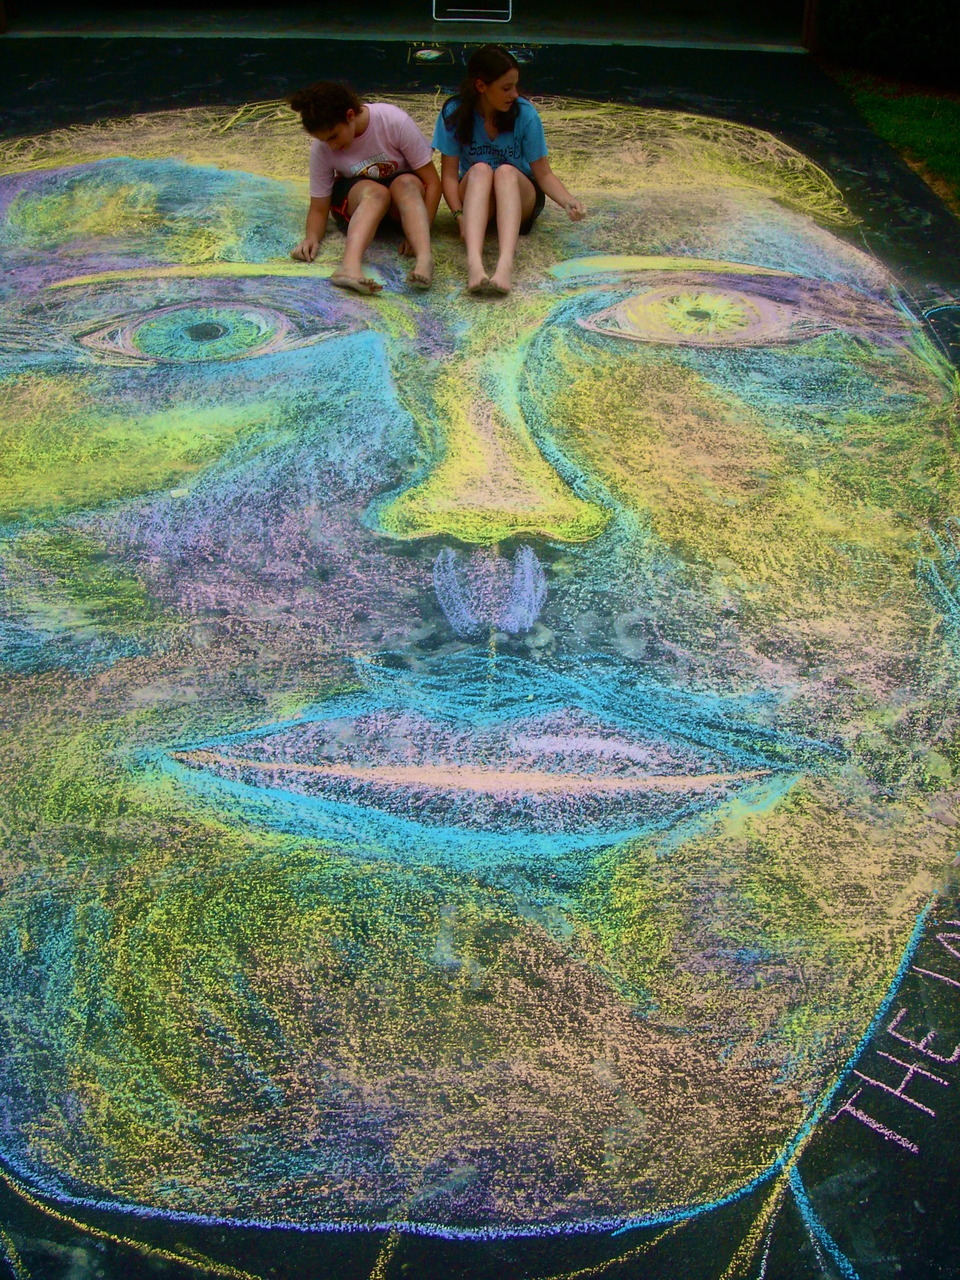 THE LOVE MAN. chalk on pavement. bye Rachel and Sydnie the final product. It was big